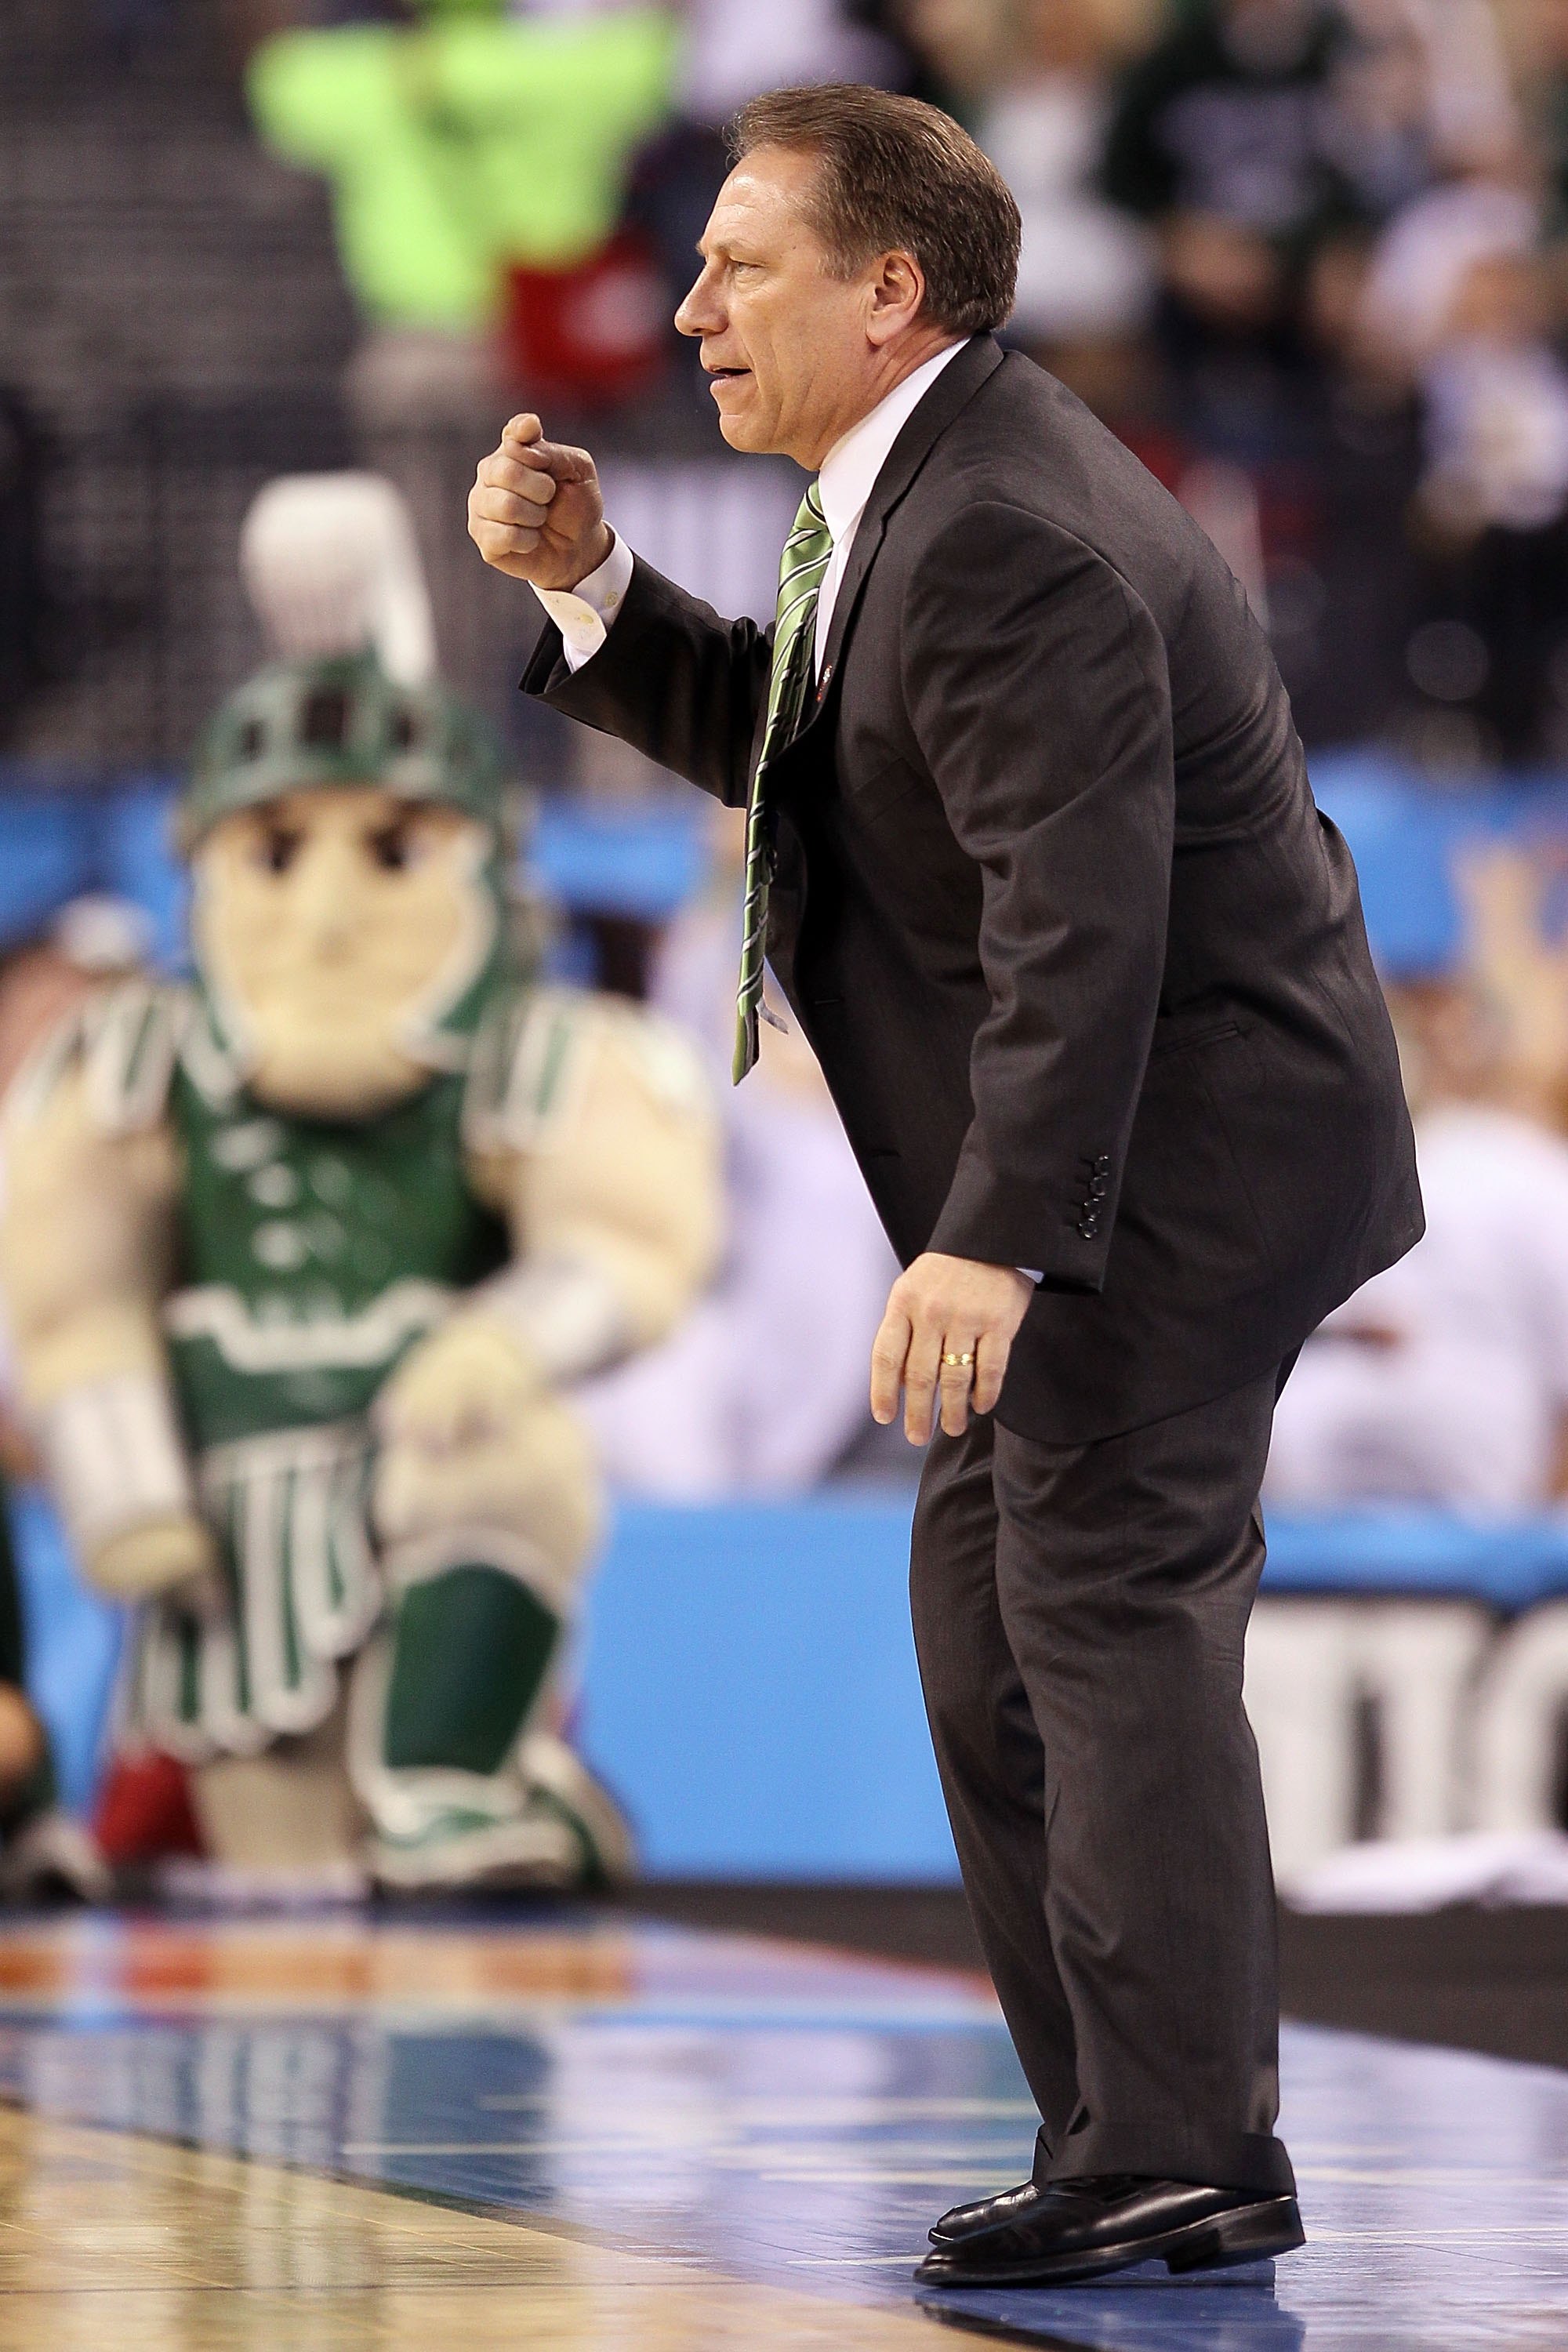 INDIANAPOLIS - APRIL 03:  Head coach Tom Izzo of the Michigan State Spartans reacts from the sideline while taking on the Butler Bulldogs during the National Semifinal game of the 2010 NCAA Division I Men's Basketball Championship on April 3, 2010 in Indi